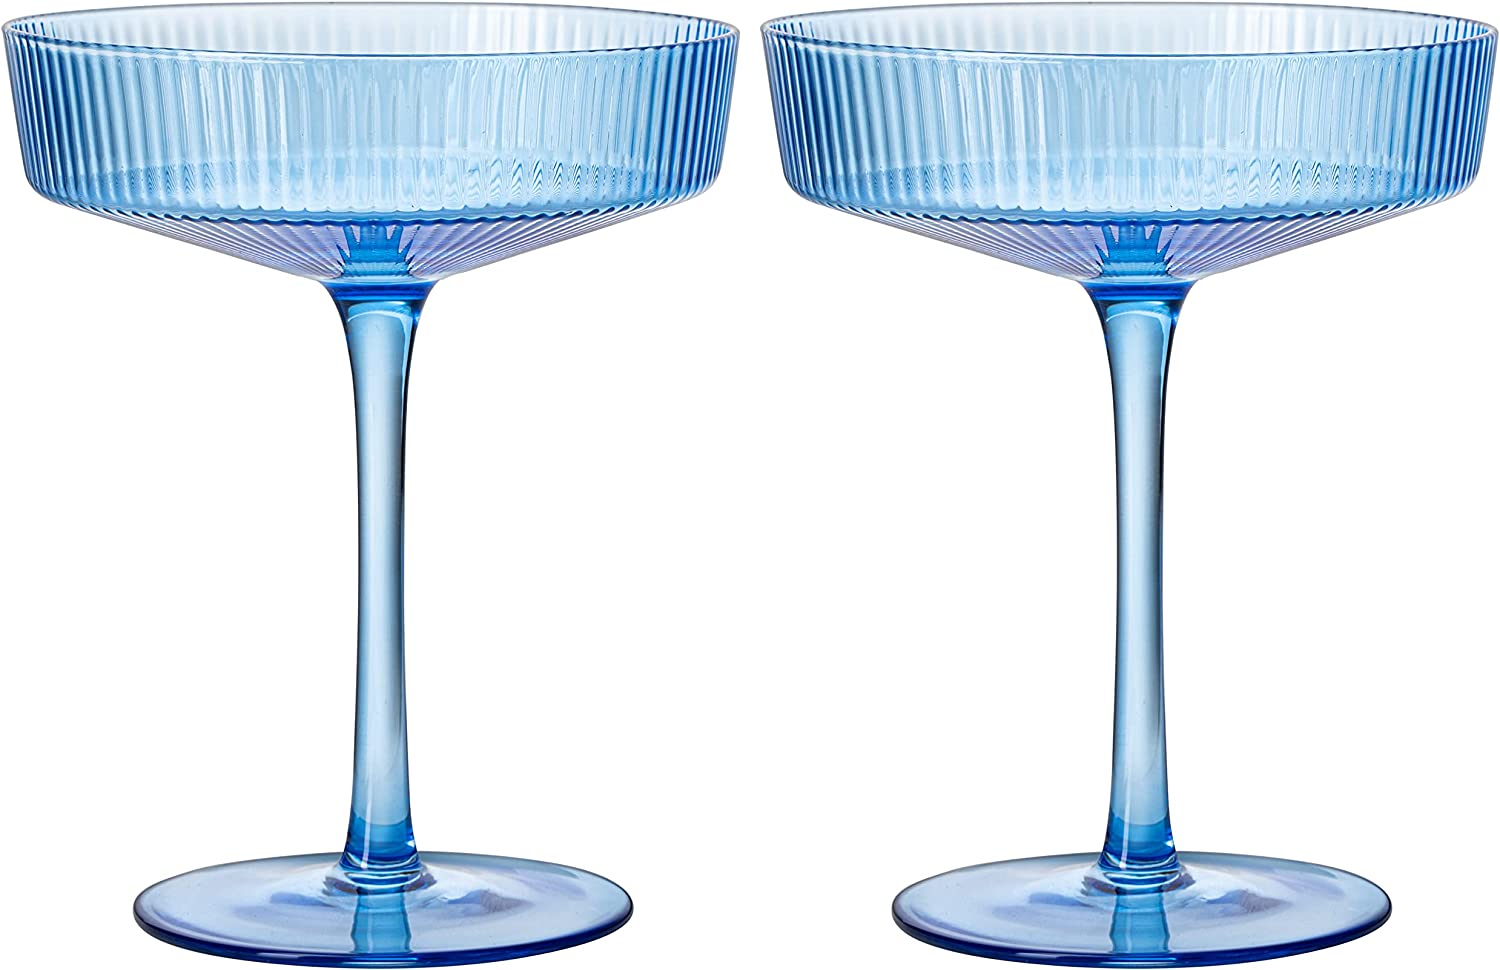 Ribbed Coupe Cocktail Glasses 8 oz | Set of 2 | Classic Manhattan Glasses For Cocktails, Champagne Coupe, Ripple Coupe Glasses, Art Deco Gatsby Vintage, Crystal with Stems (Blue, Set of 2)-4